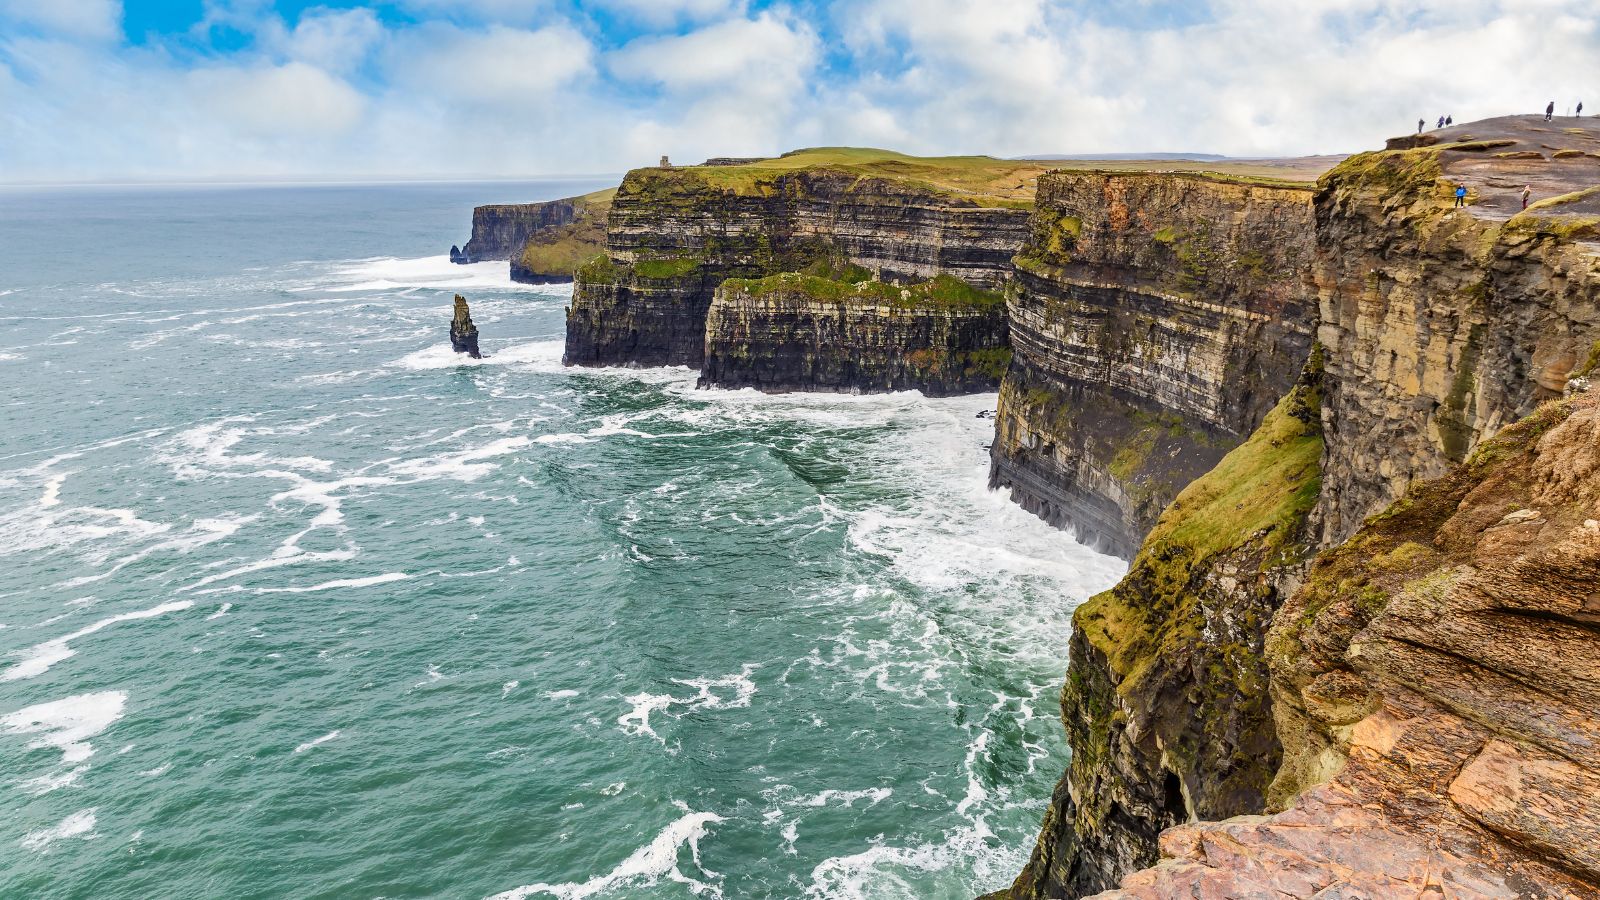 <p>Welcome to one of Ireland’s most popular attractions. This dramatic stretch of coast feels like the end of the earth. Sheer cliffs drop like some impenetrable rock fortress to stormy oceans below.</p><p>A hiking trail around the cliff edge offers sublime panoramic views, but you’ll get that iconic “Cliffs of Moher” shot next door to the visitor center (which is worth checking out, too). Weather permitting, you can spend a happy few hours here just walking and enjoying the scenery.</p>